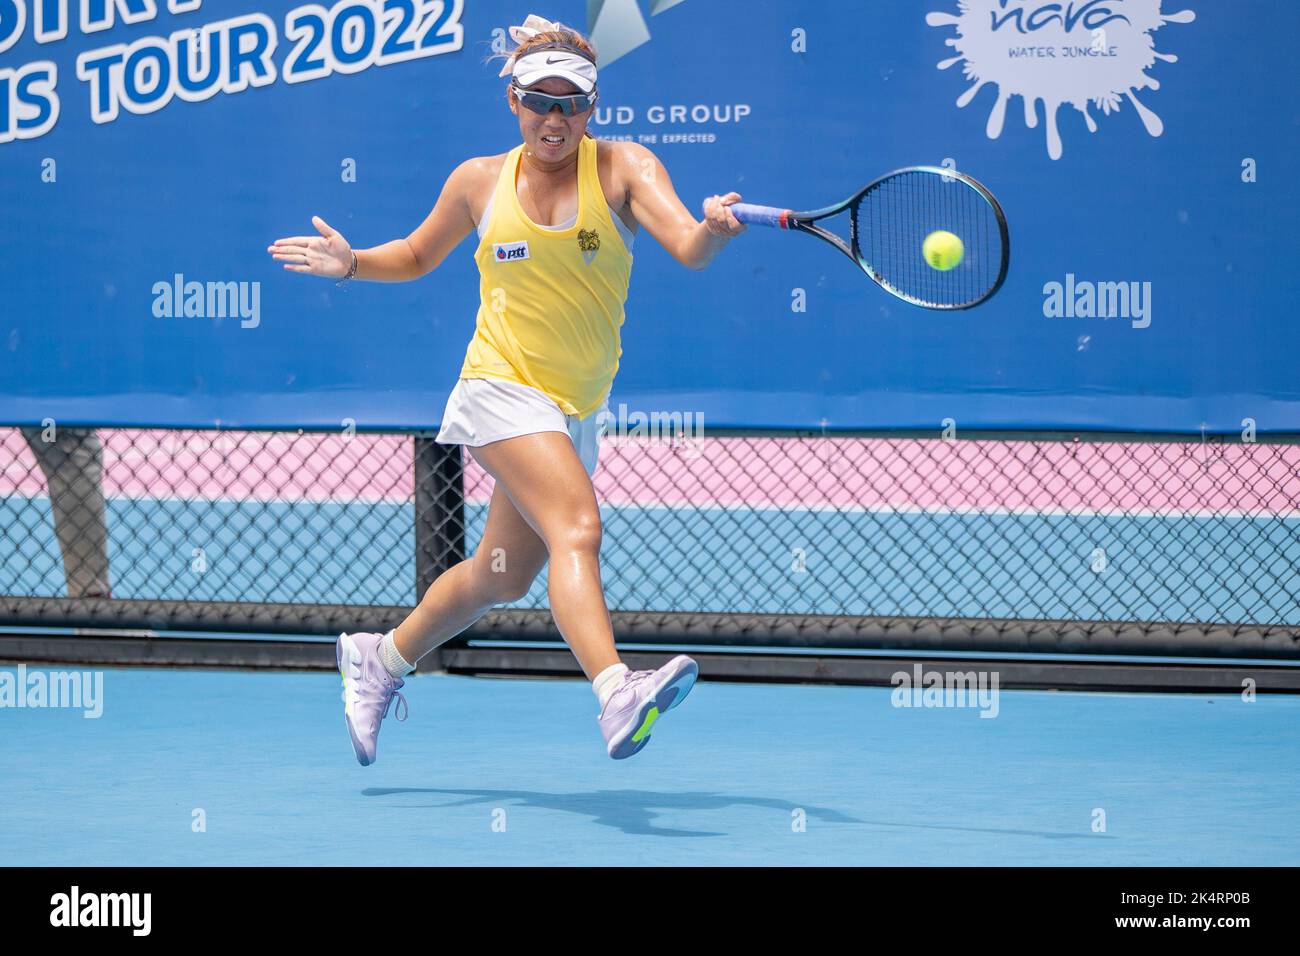 fodbold Tilmeld Lim HUA HIN, THAILAND - OCTOBER 4: Punnin Kovapitukted from Thailand during the  first round against Nefisa Berberovic from Bosnia and Herzegovina at the  CAL-COMP & XYZPRINTING ITF WORLD TENNIS TOUR 2022 at